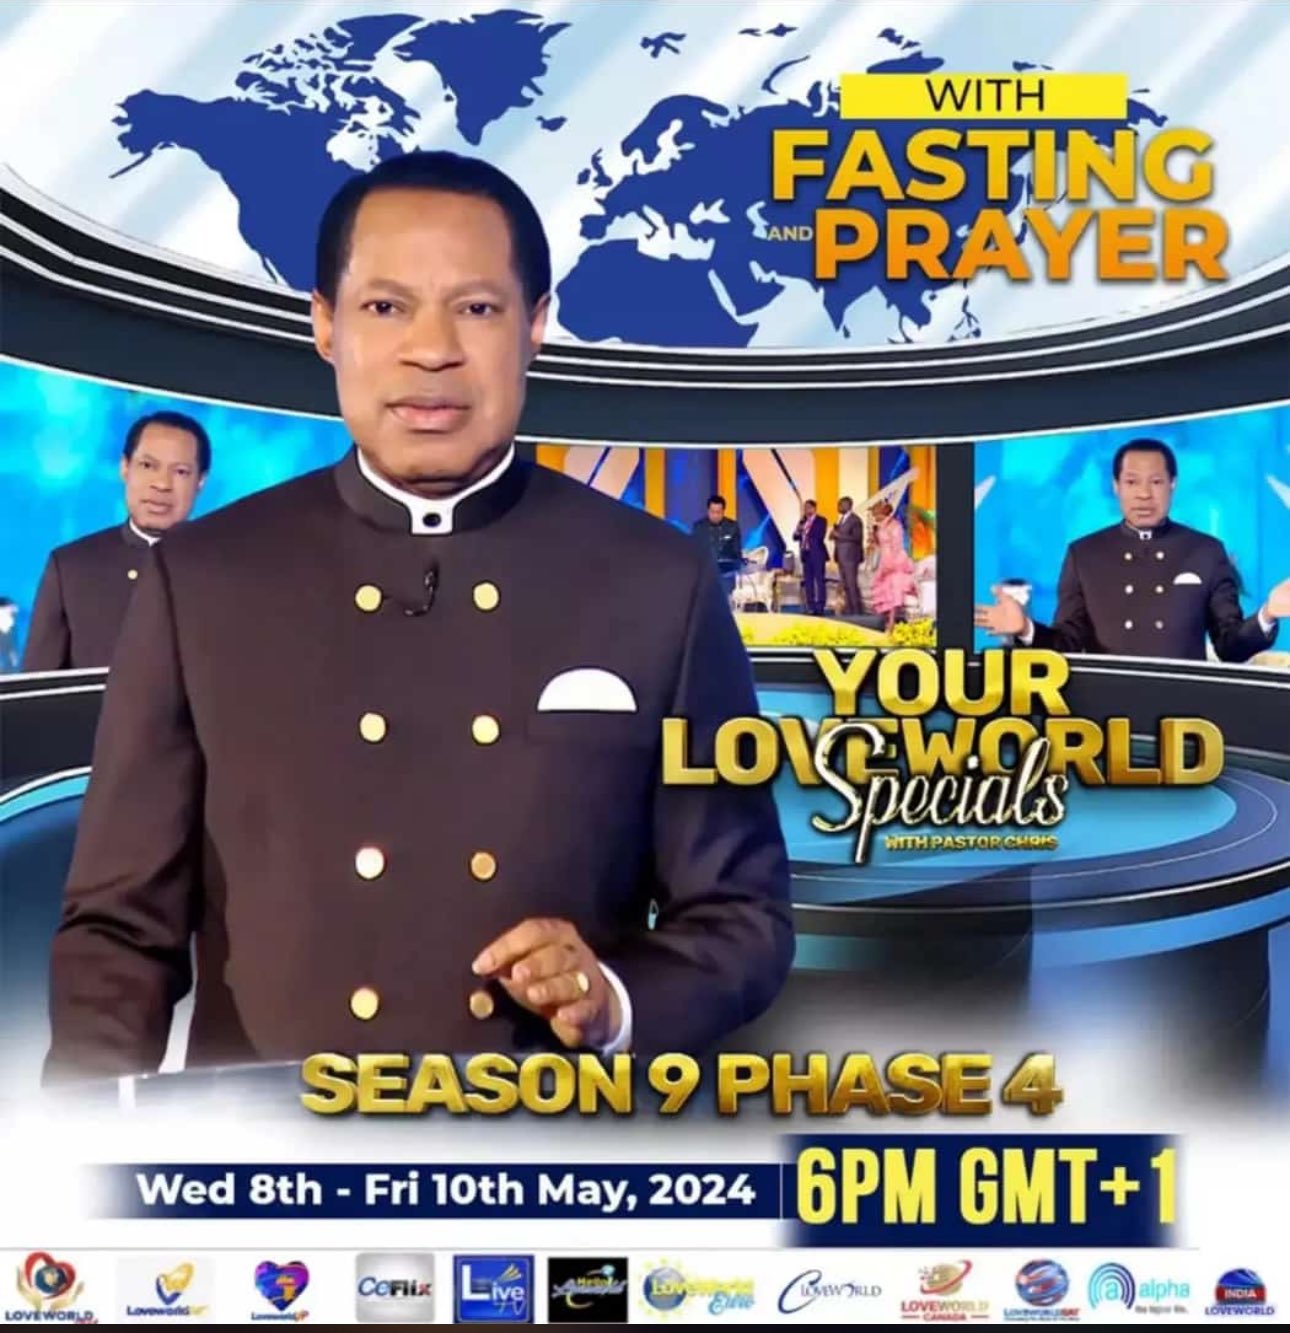 YOUR LOVEWORLD SPECIAL WITH PASTOR CHRIS, SEASON 9 PHASE 4 IS HERE!